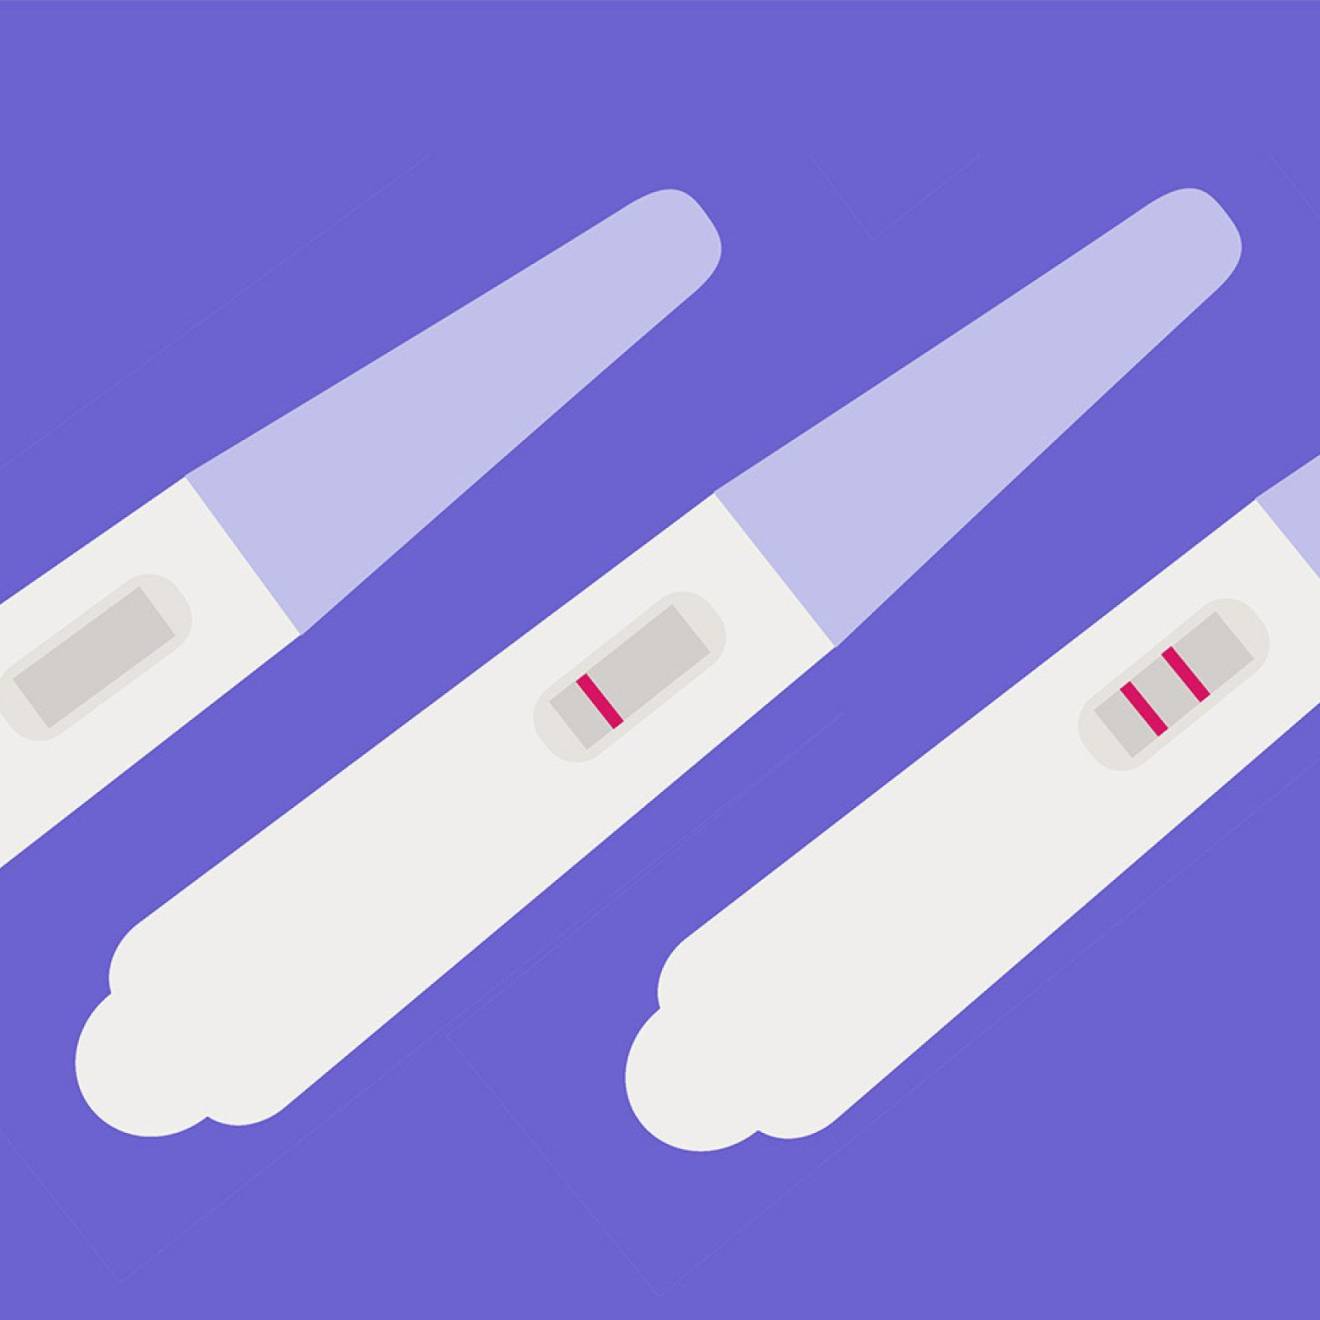 Illustration of three pregnancy tests on a lilac background